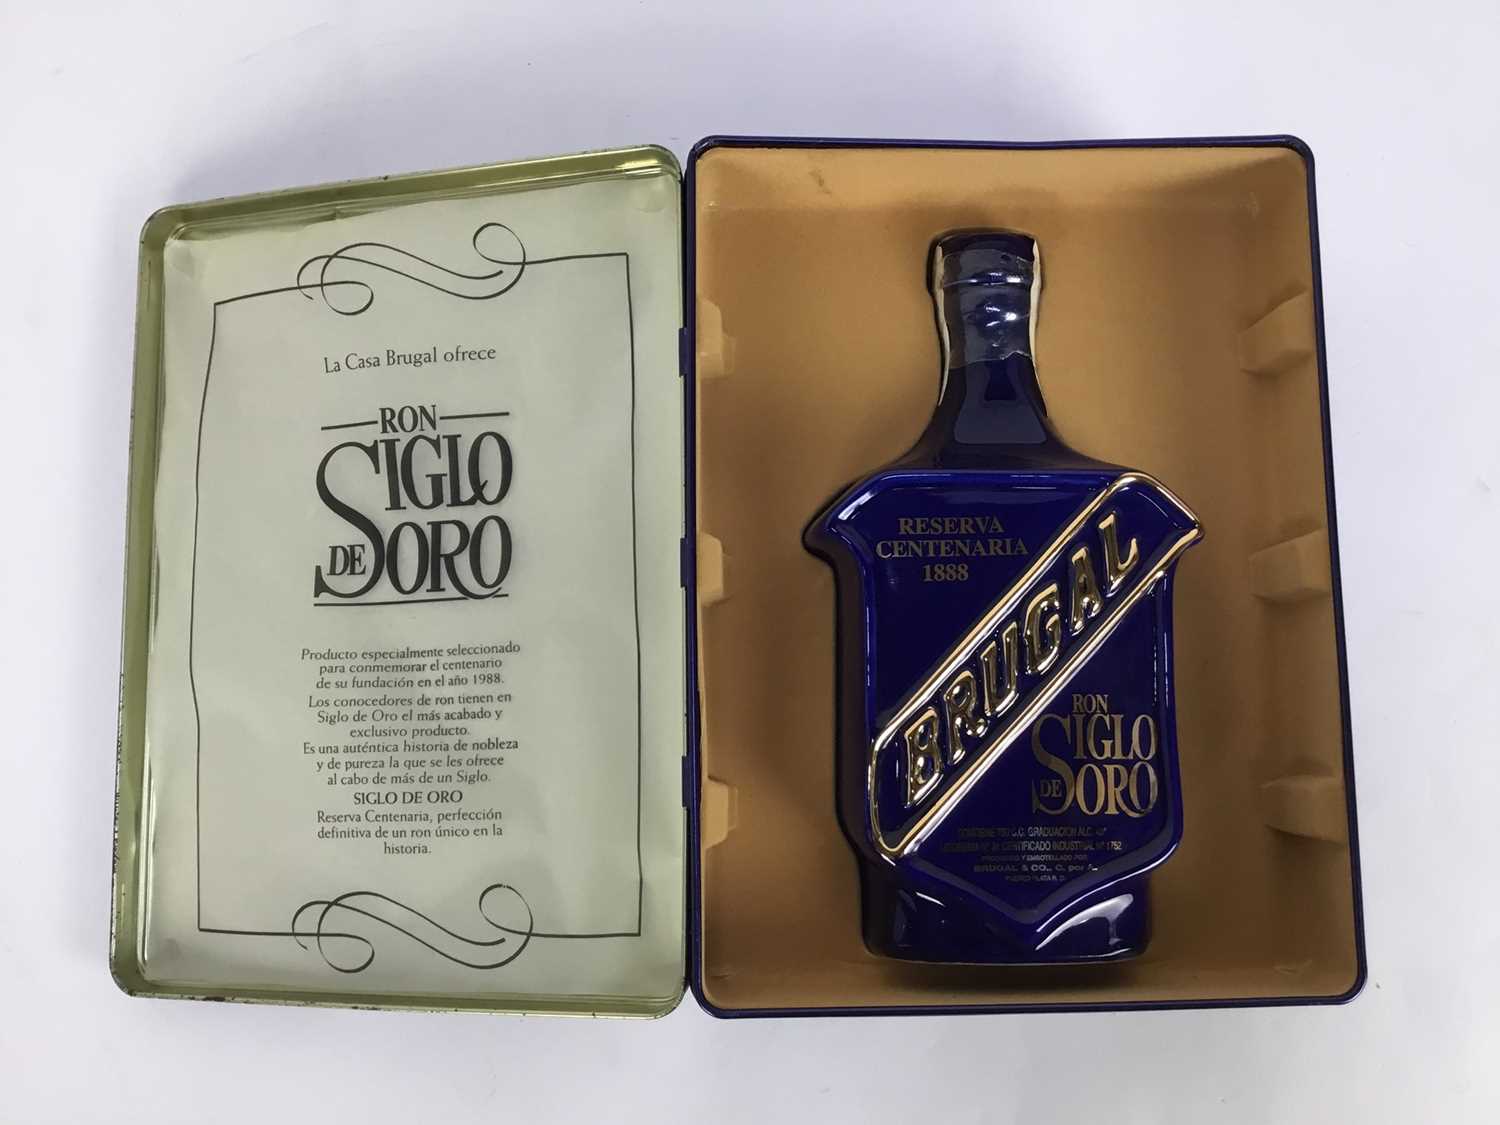 Lot 29 - One bottle, Ron Siglo De Soro, in ceramic bottle and original fitted tin box